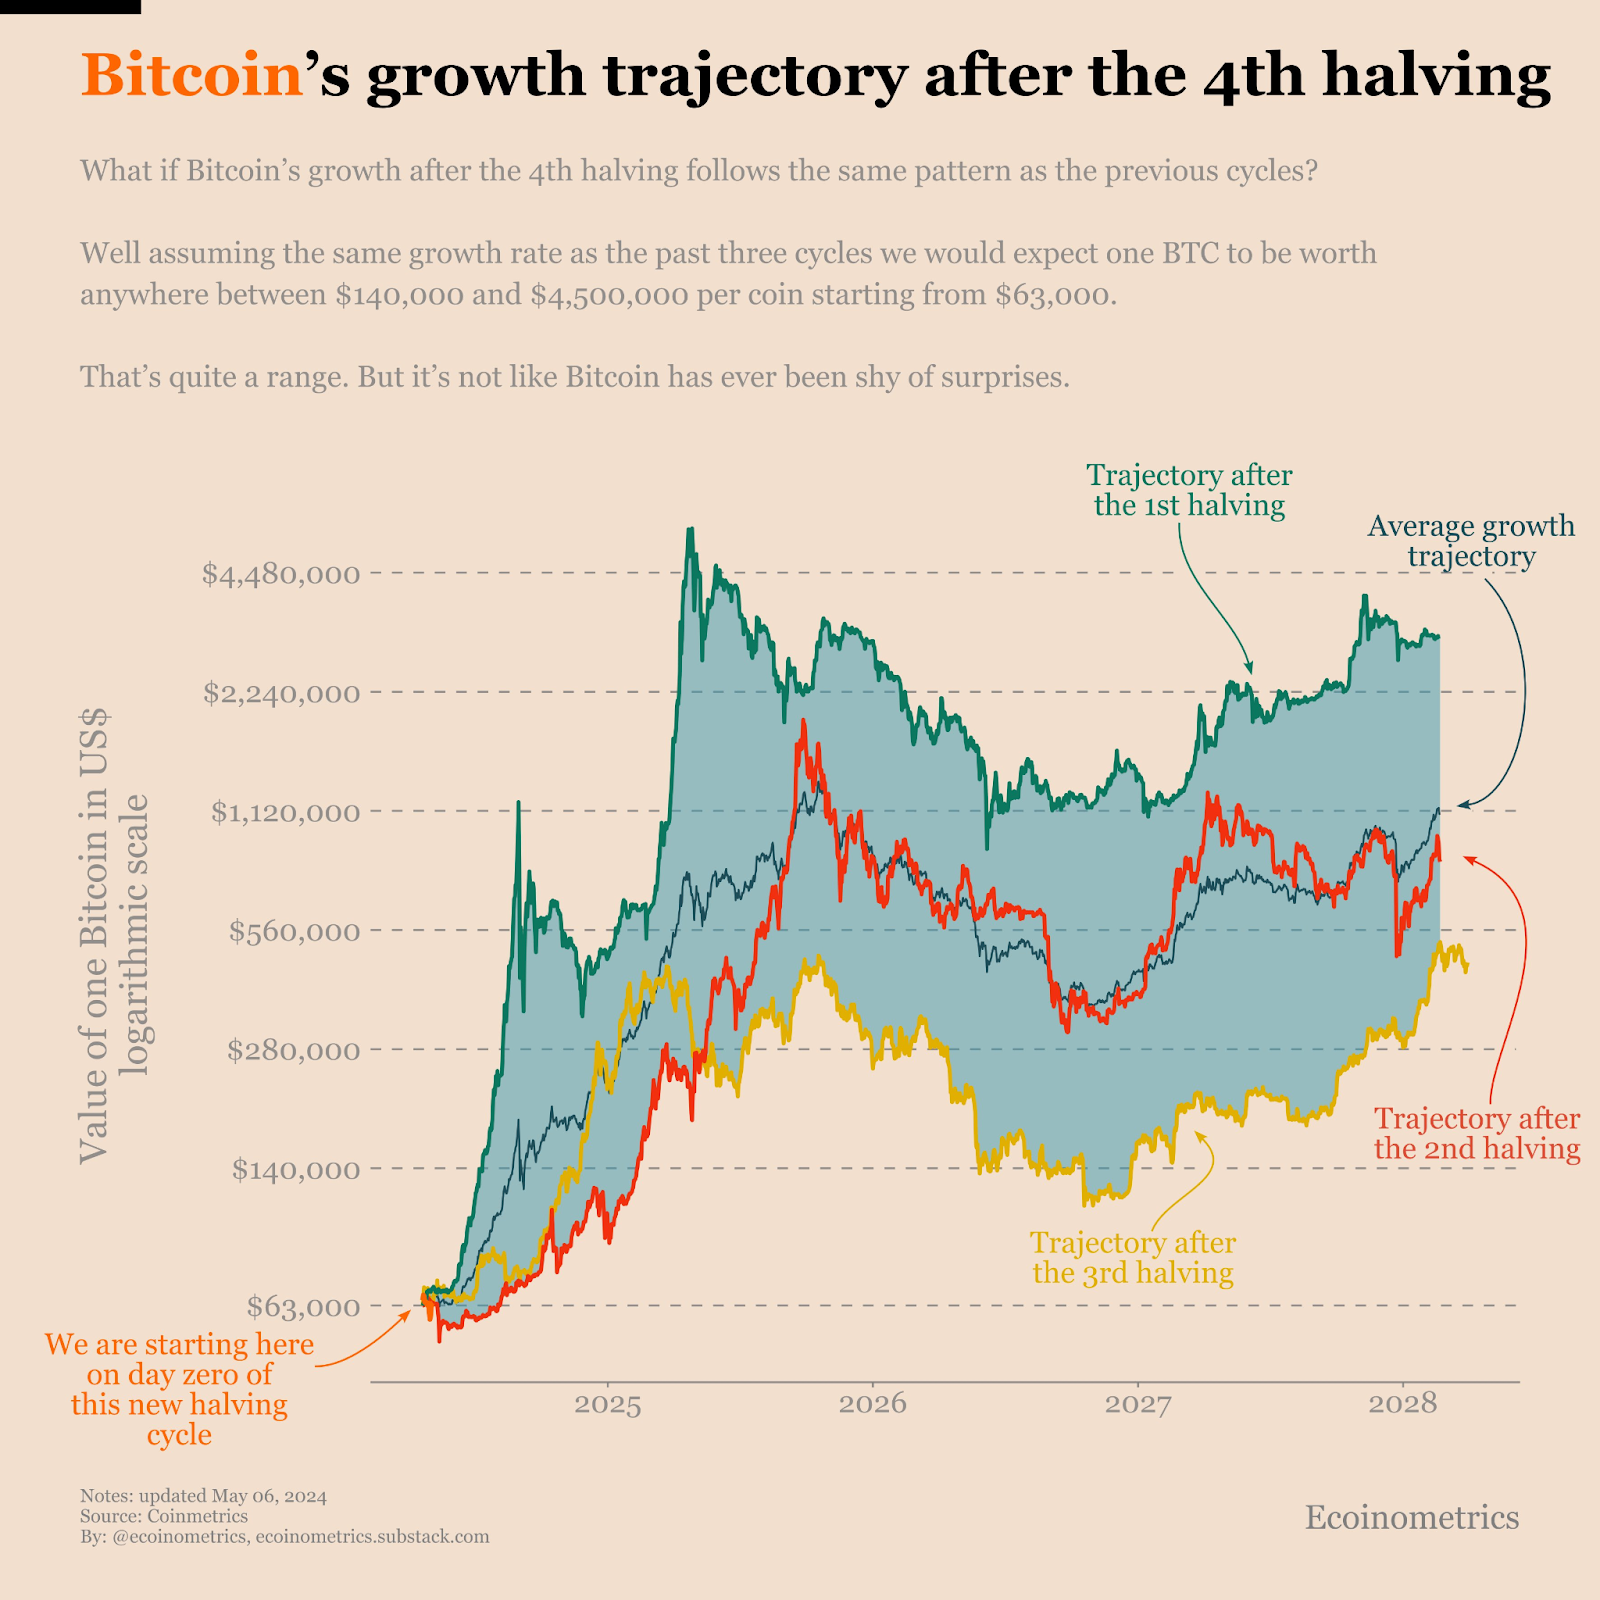 Ecoinometrics analysis suggests that we now stand right at the beginning of Bitcoin’s halving cycle surge.